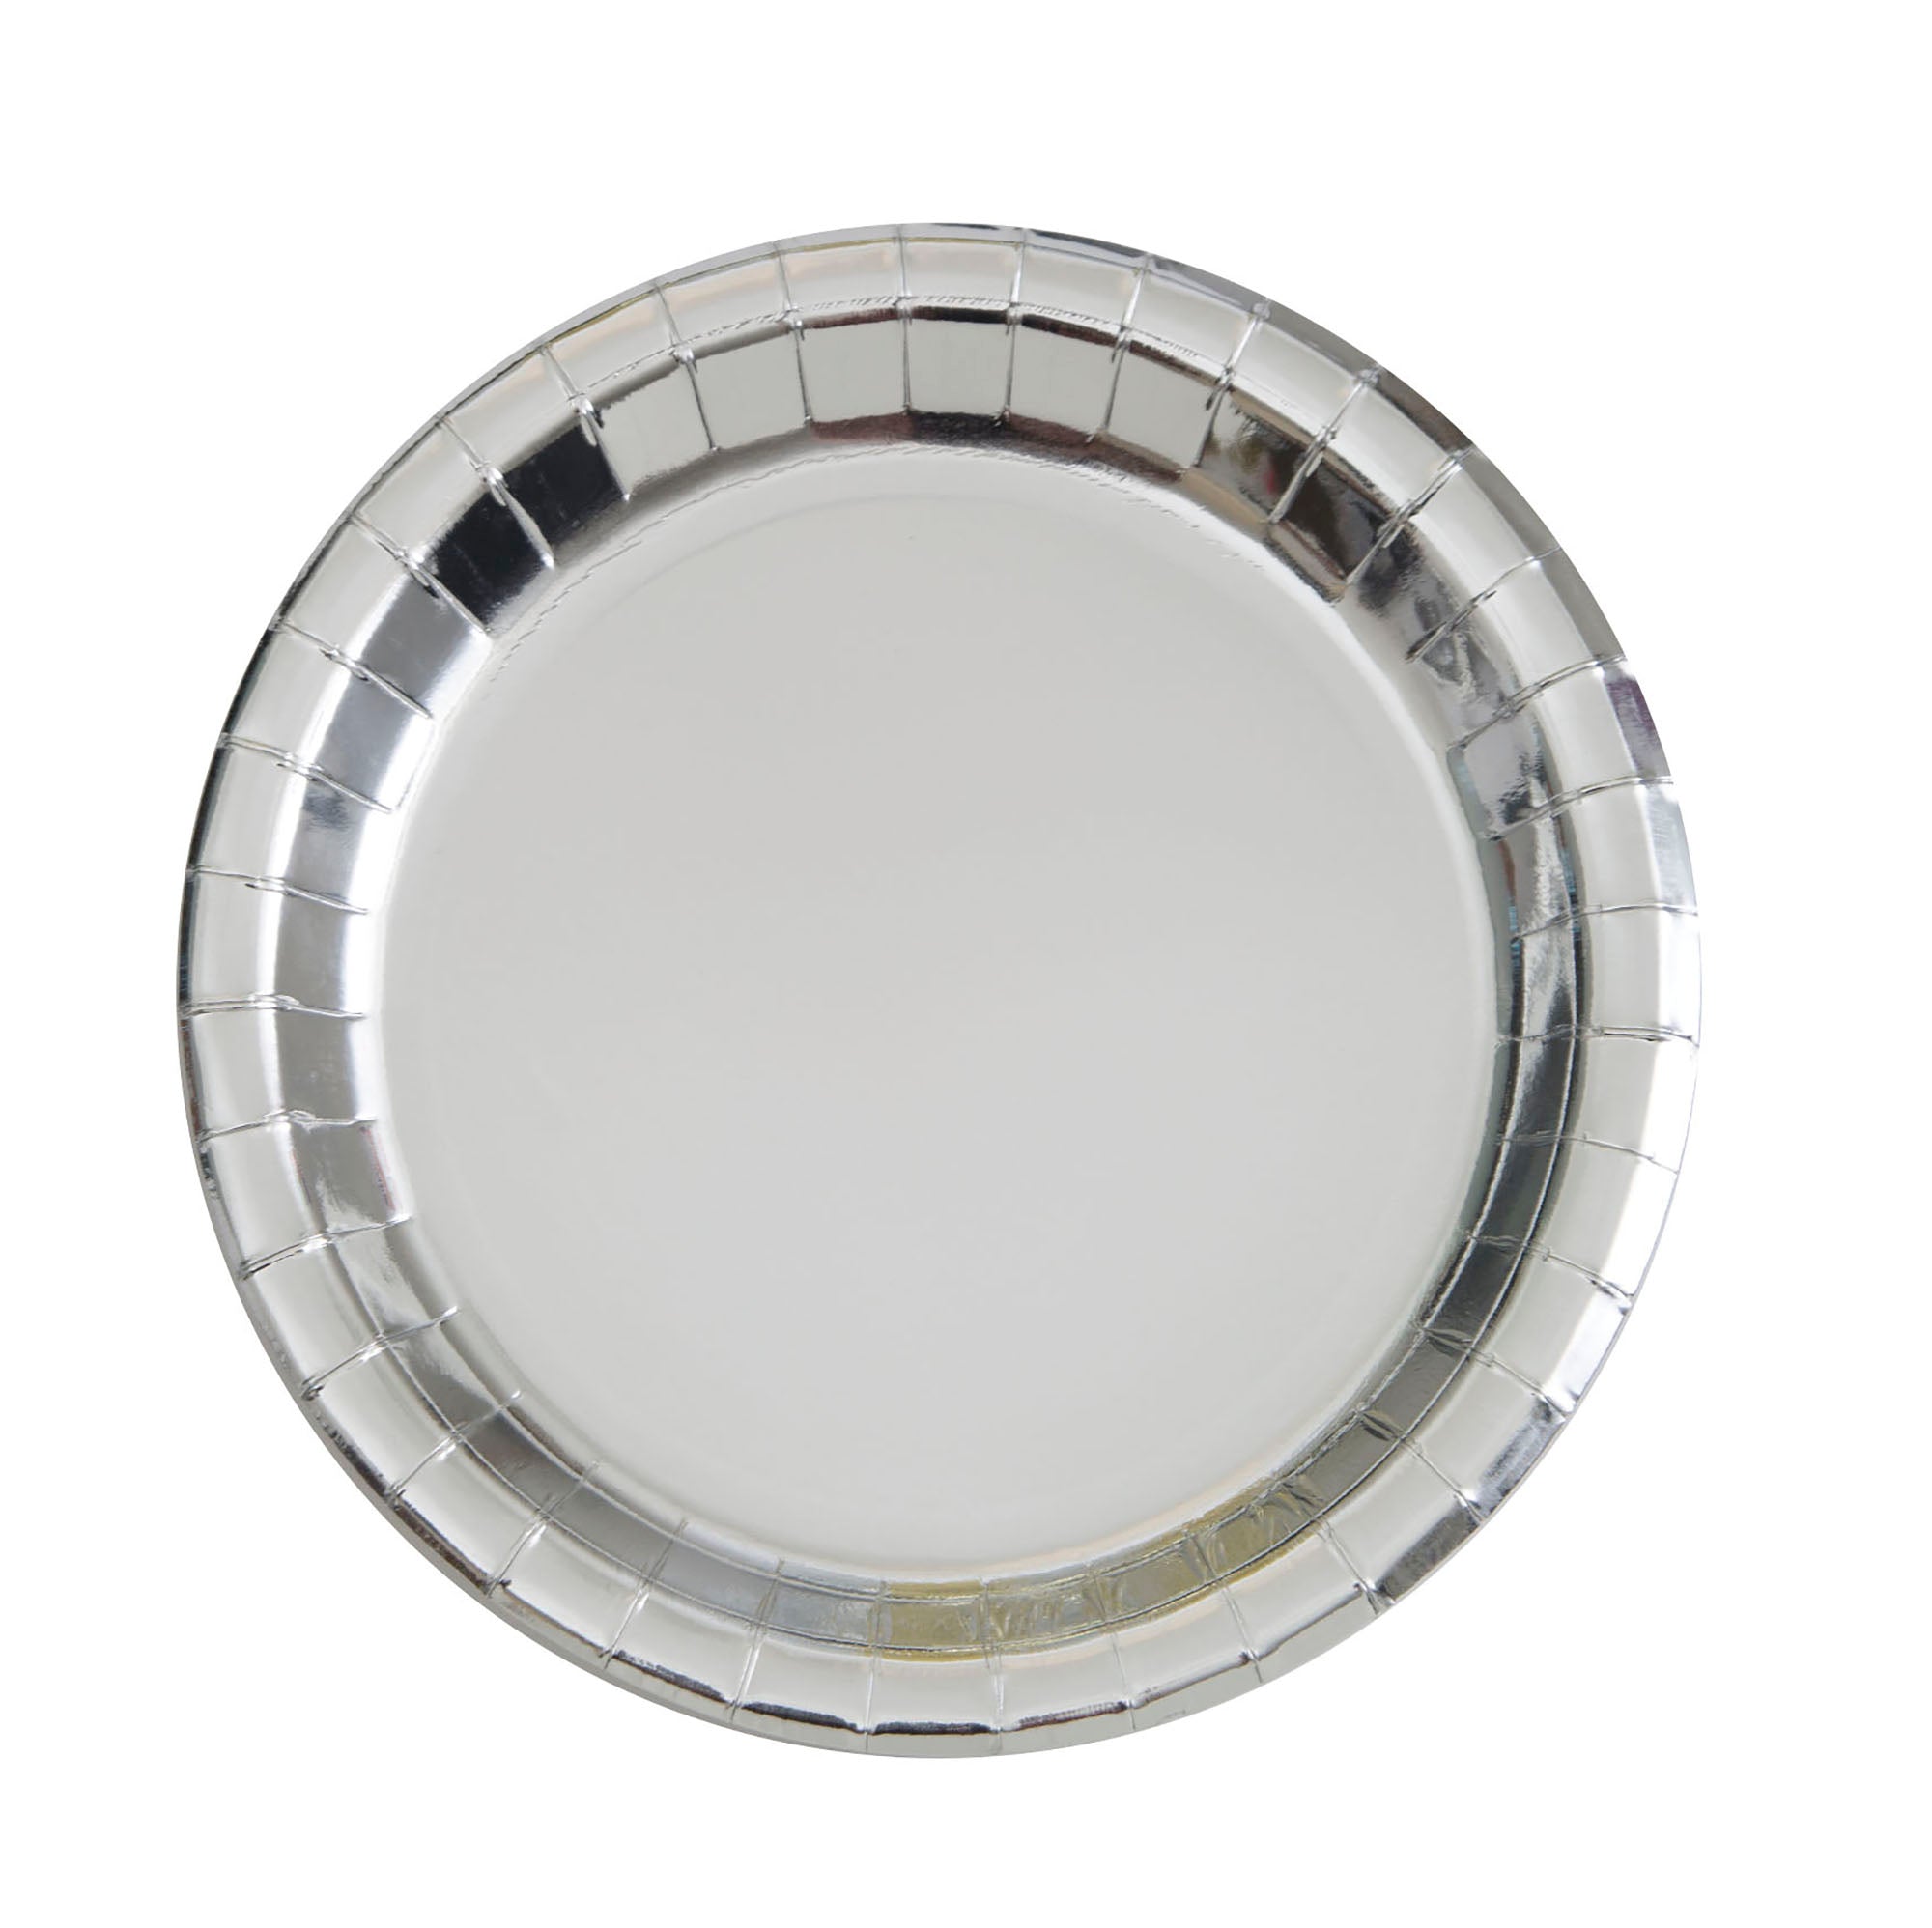 8 Round Paper Plates Metallic Silver 9in